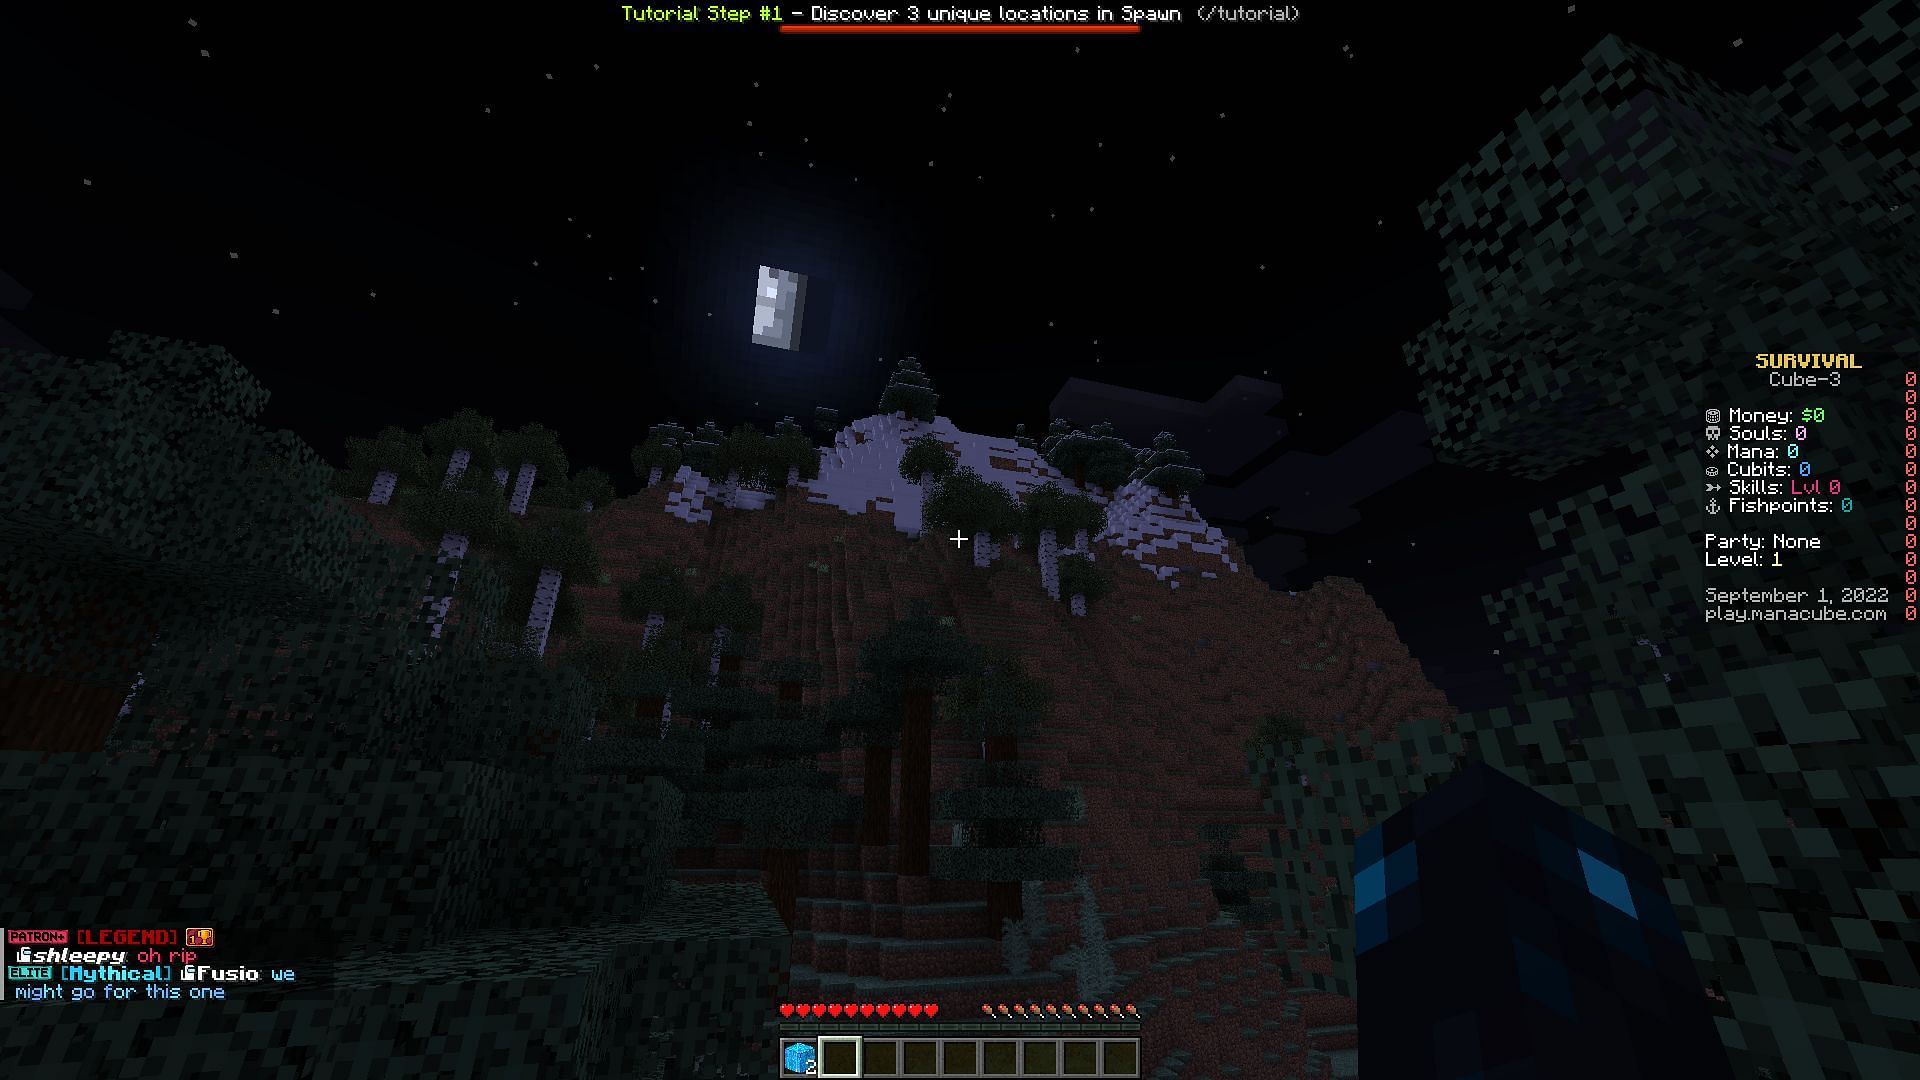 Survival game mode in the ManaCube Minecraft server (Image via Mojang)